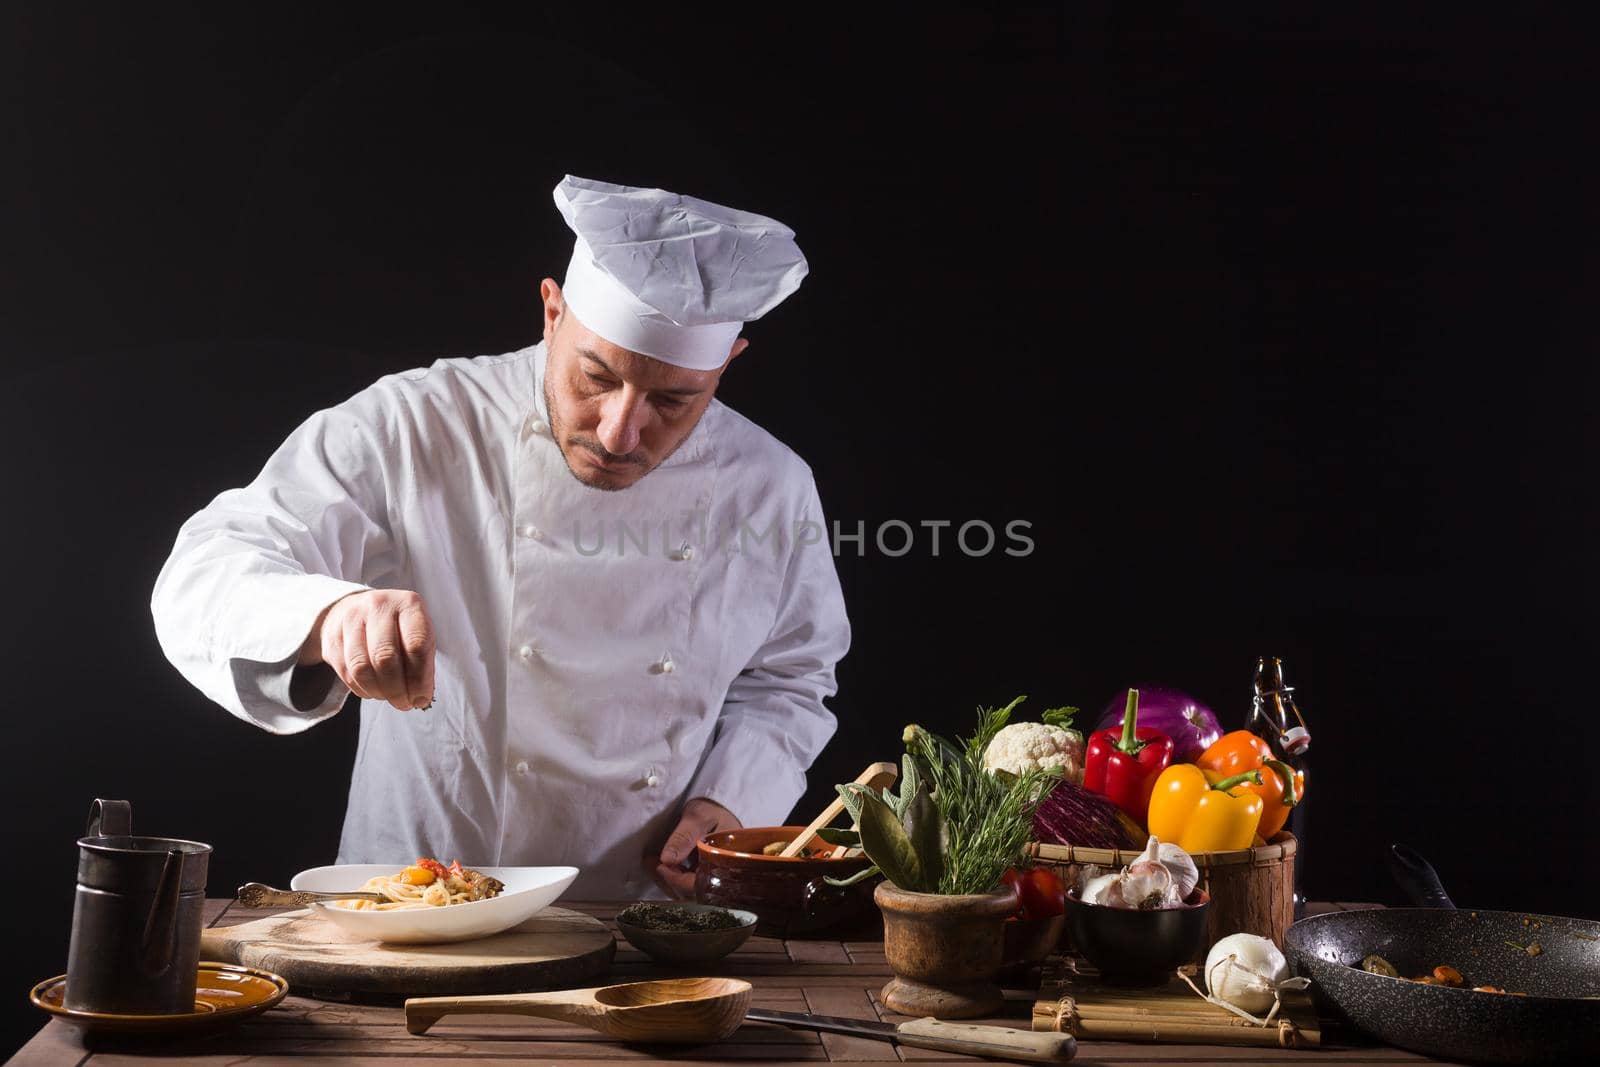 Male cook in white uniform and hat putting pot herbs on on food plate with spaghetti and vegetable before serving while working in a restaurant kitchen